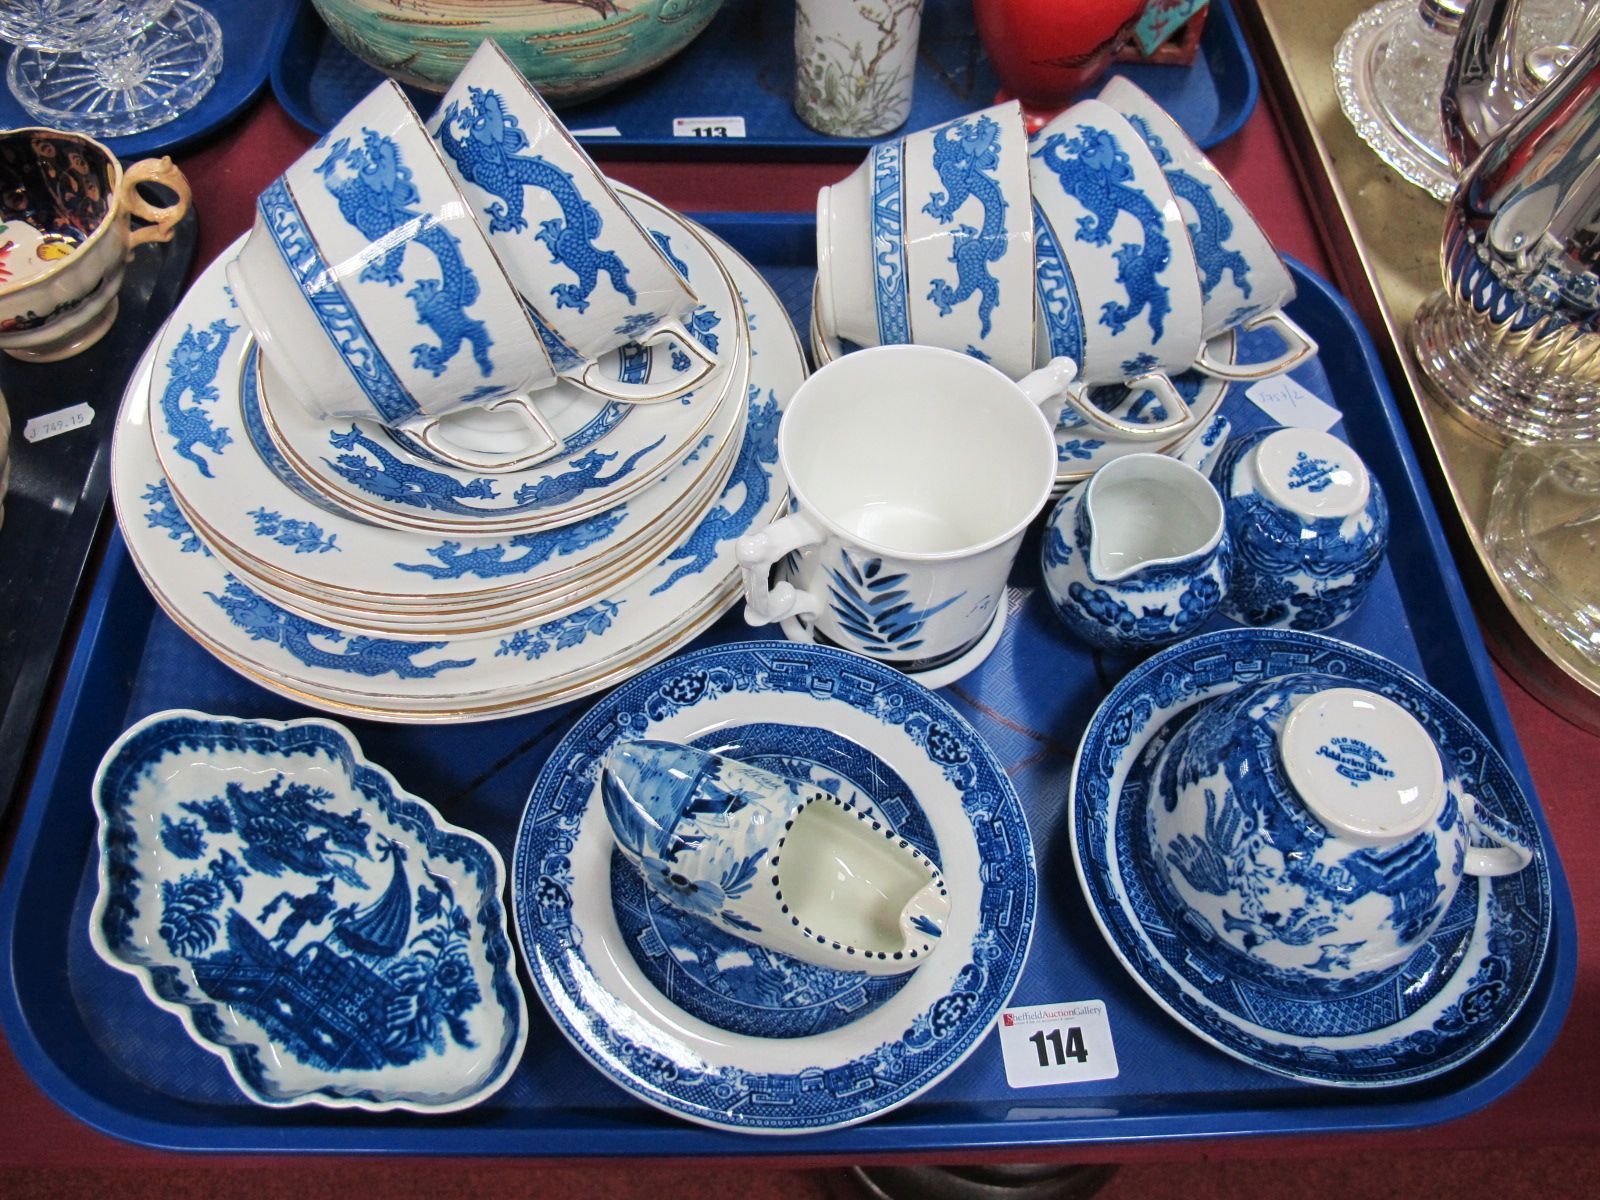 George Jones Crescent Dragon Pattern Tea Cups and Saucers, together with matching plates, Adderley